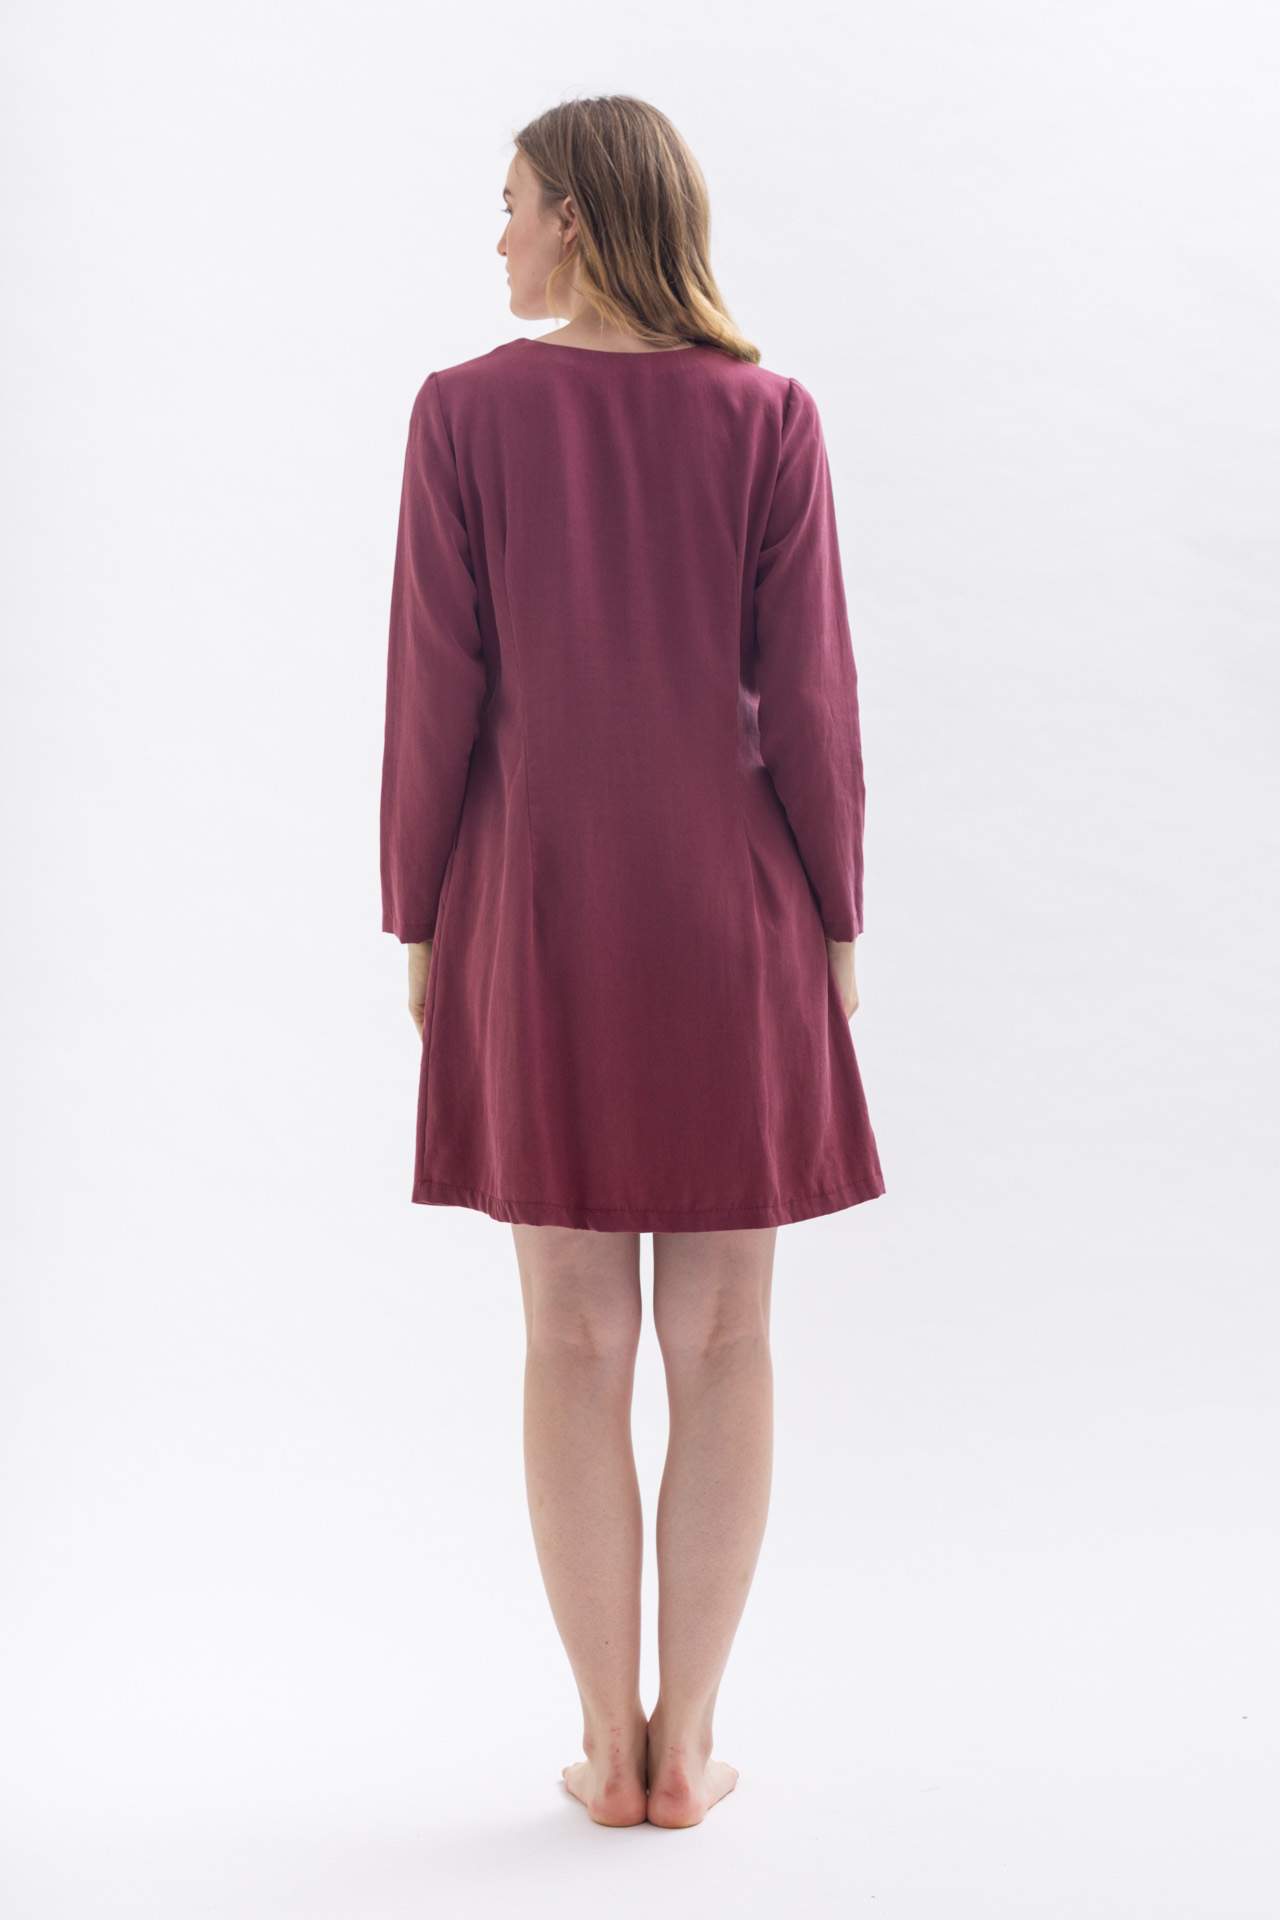 A-line dress "GREE-TA" in red made of Tencel